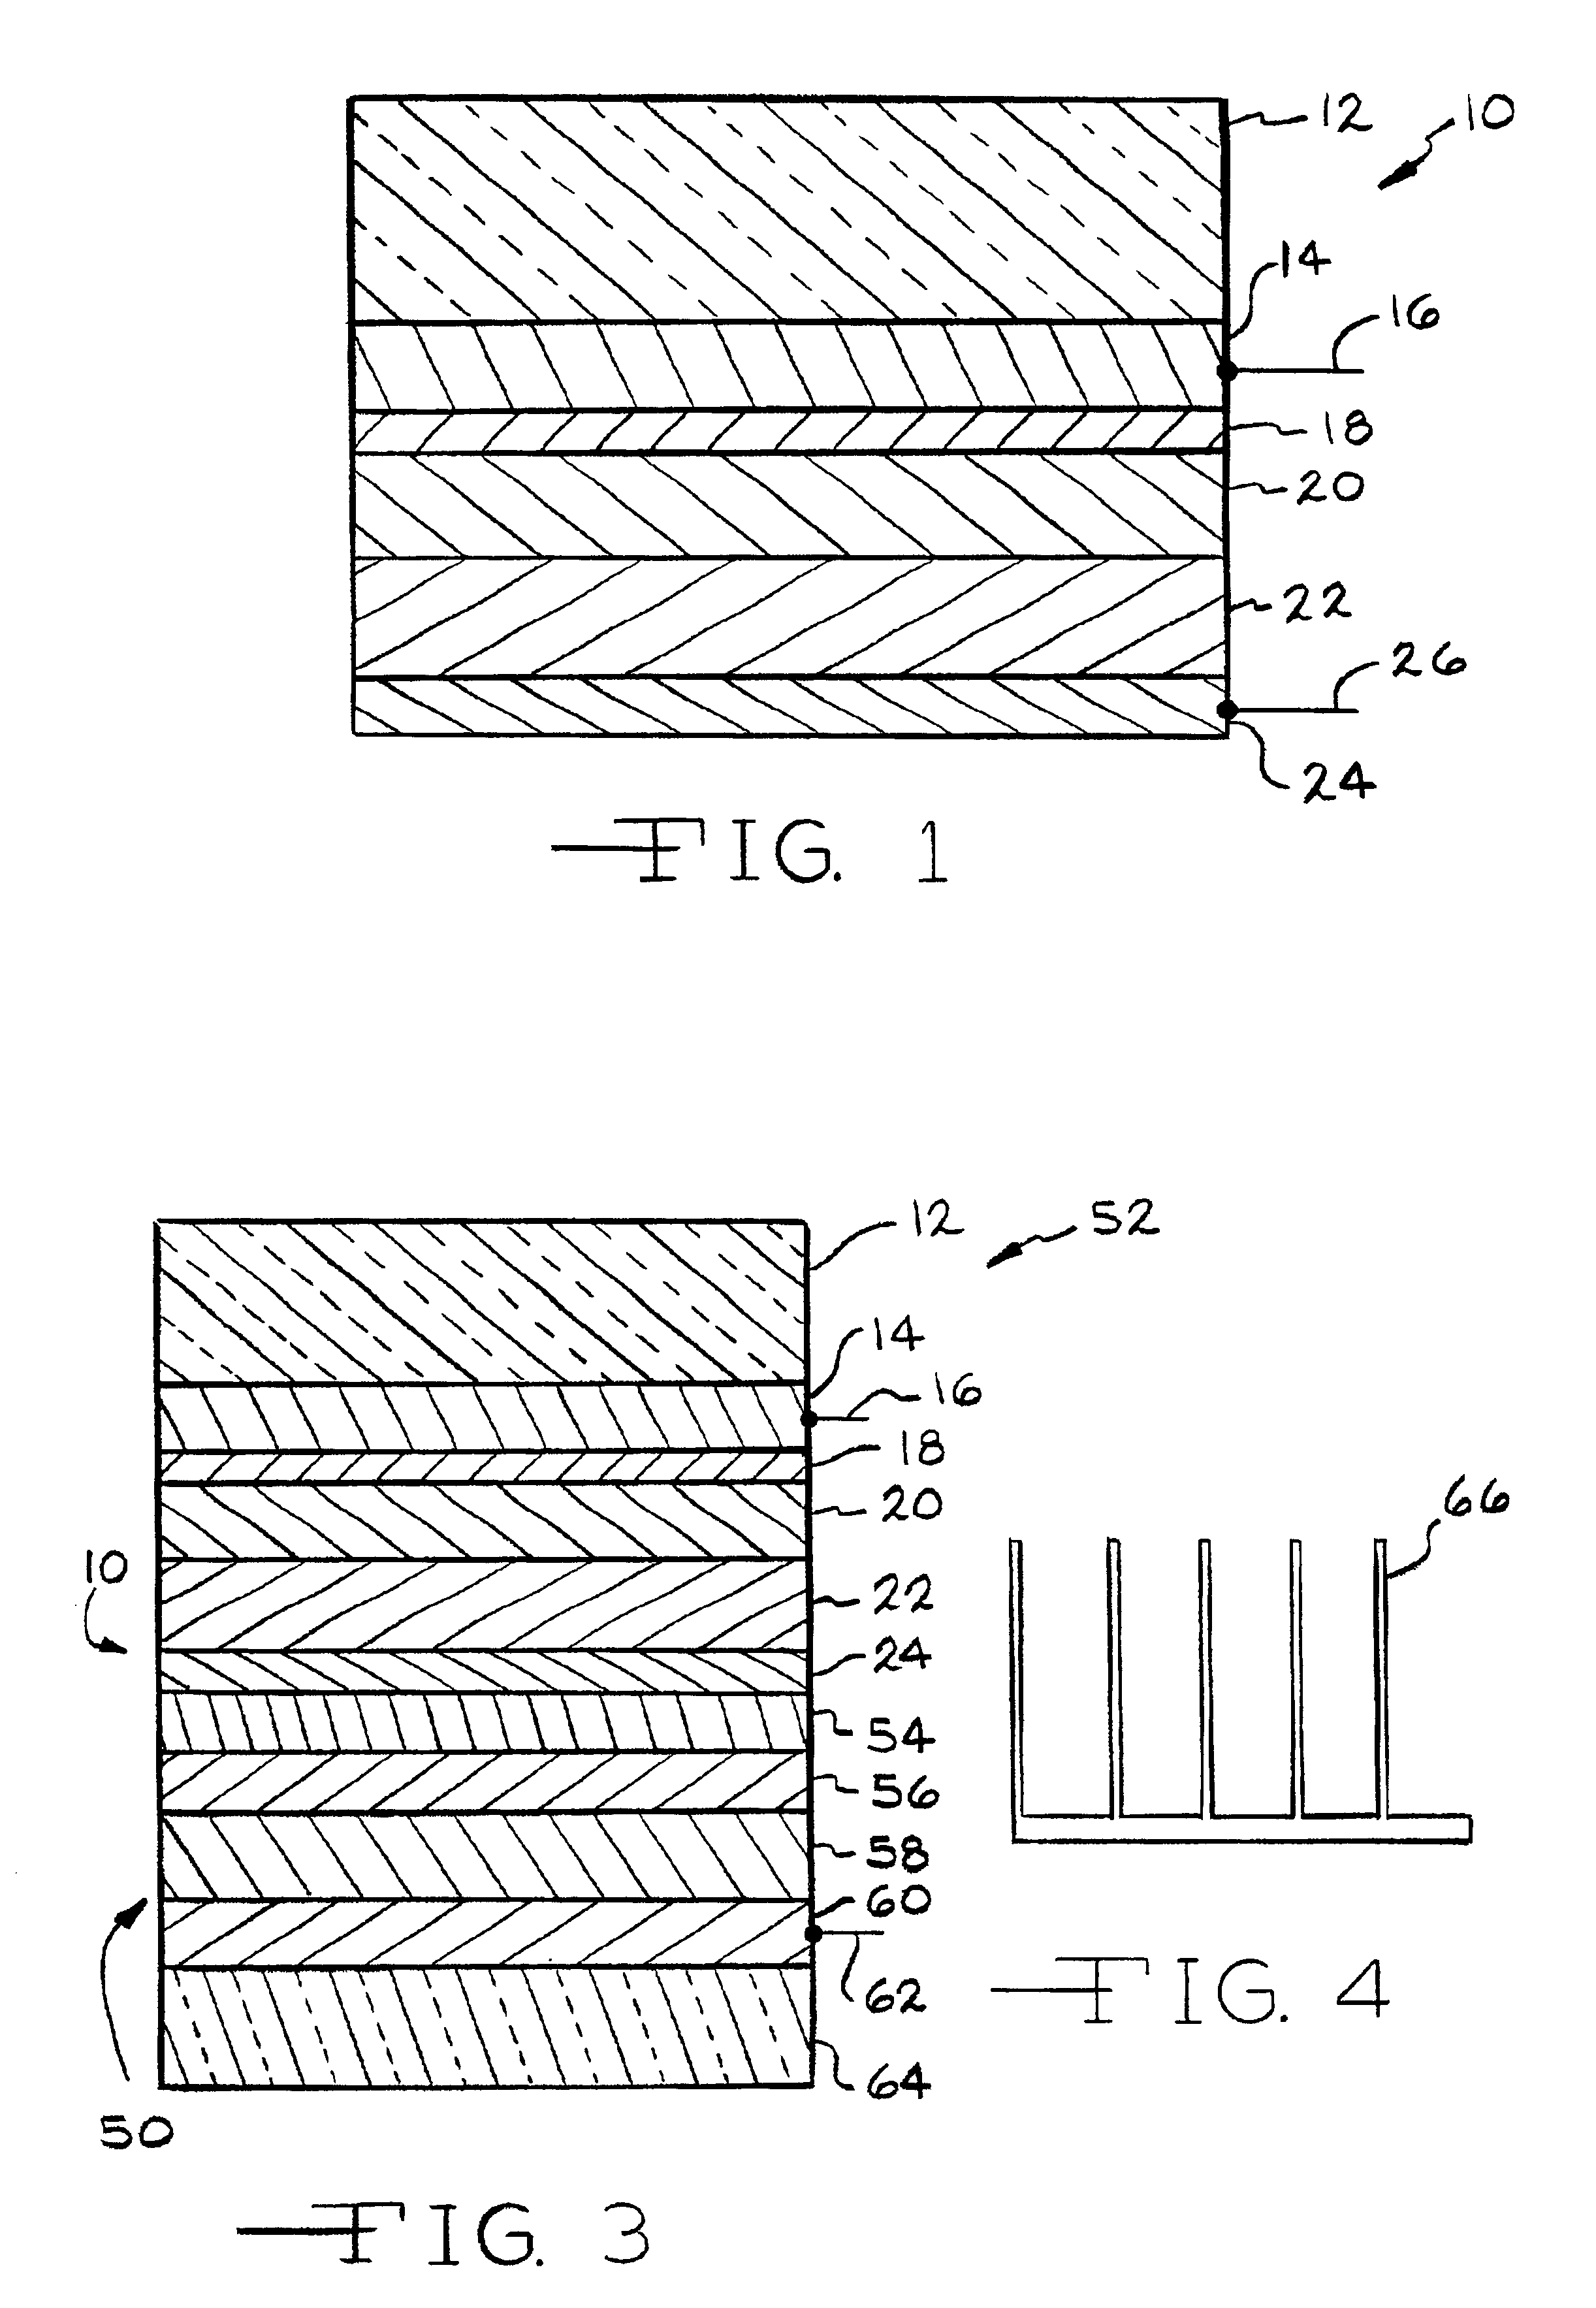 Method of manufacturing semiconductor having group II-group VI compounds doped with nitrogen